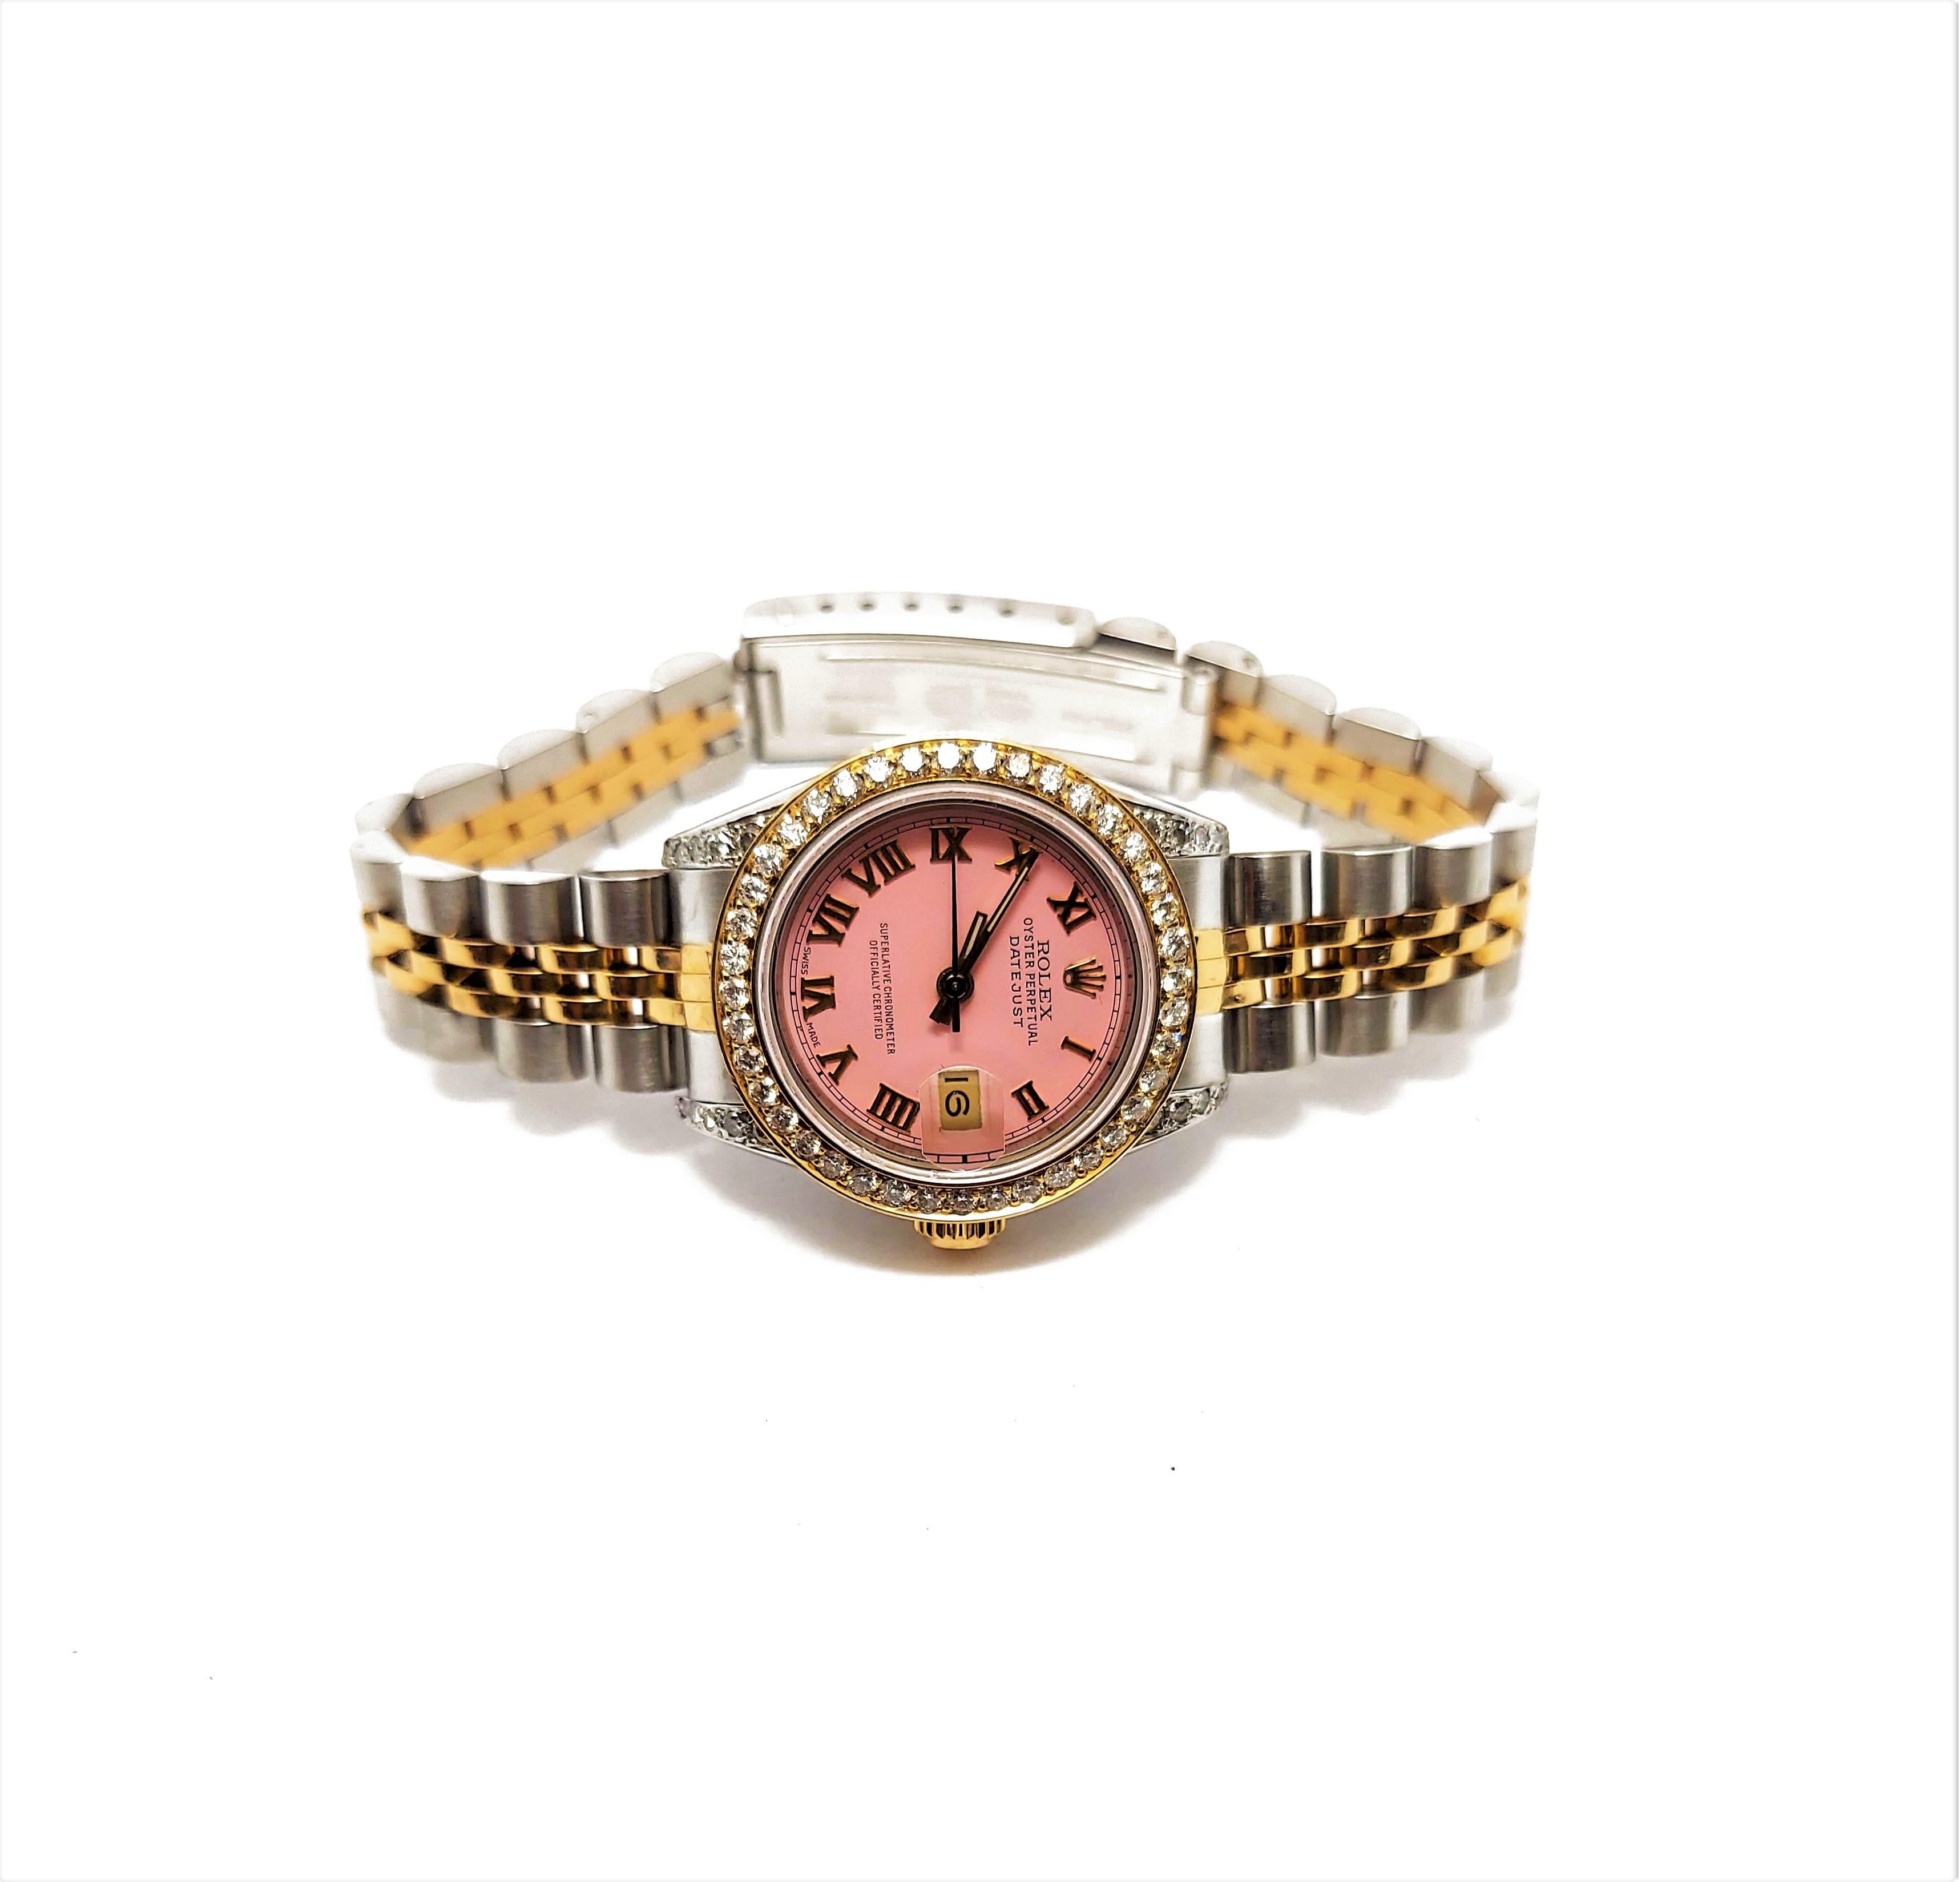 Brand - Rolex
Gender - Ladies
Condition - Pre owned
Model - 69173 datejust
Metals - solid gold & stainless steel
Case size - 26mm
Bezel - yellow gold diamond
Crystal - sapphire
Movement - automatic caliber 2135
Dial - refinished pink roman